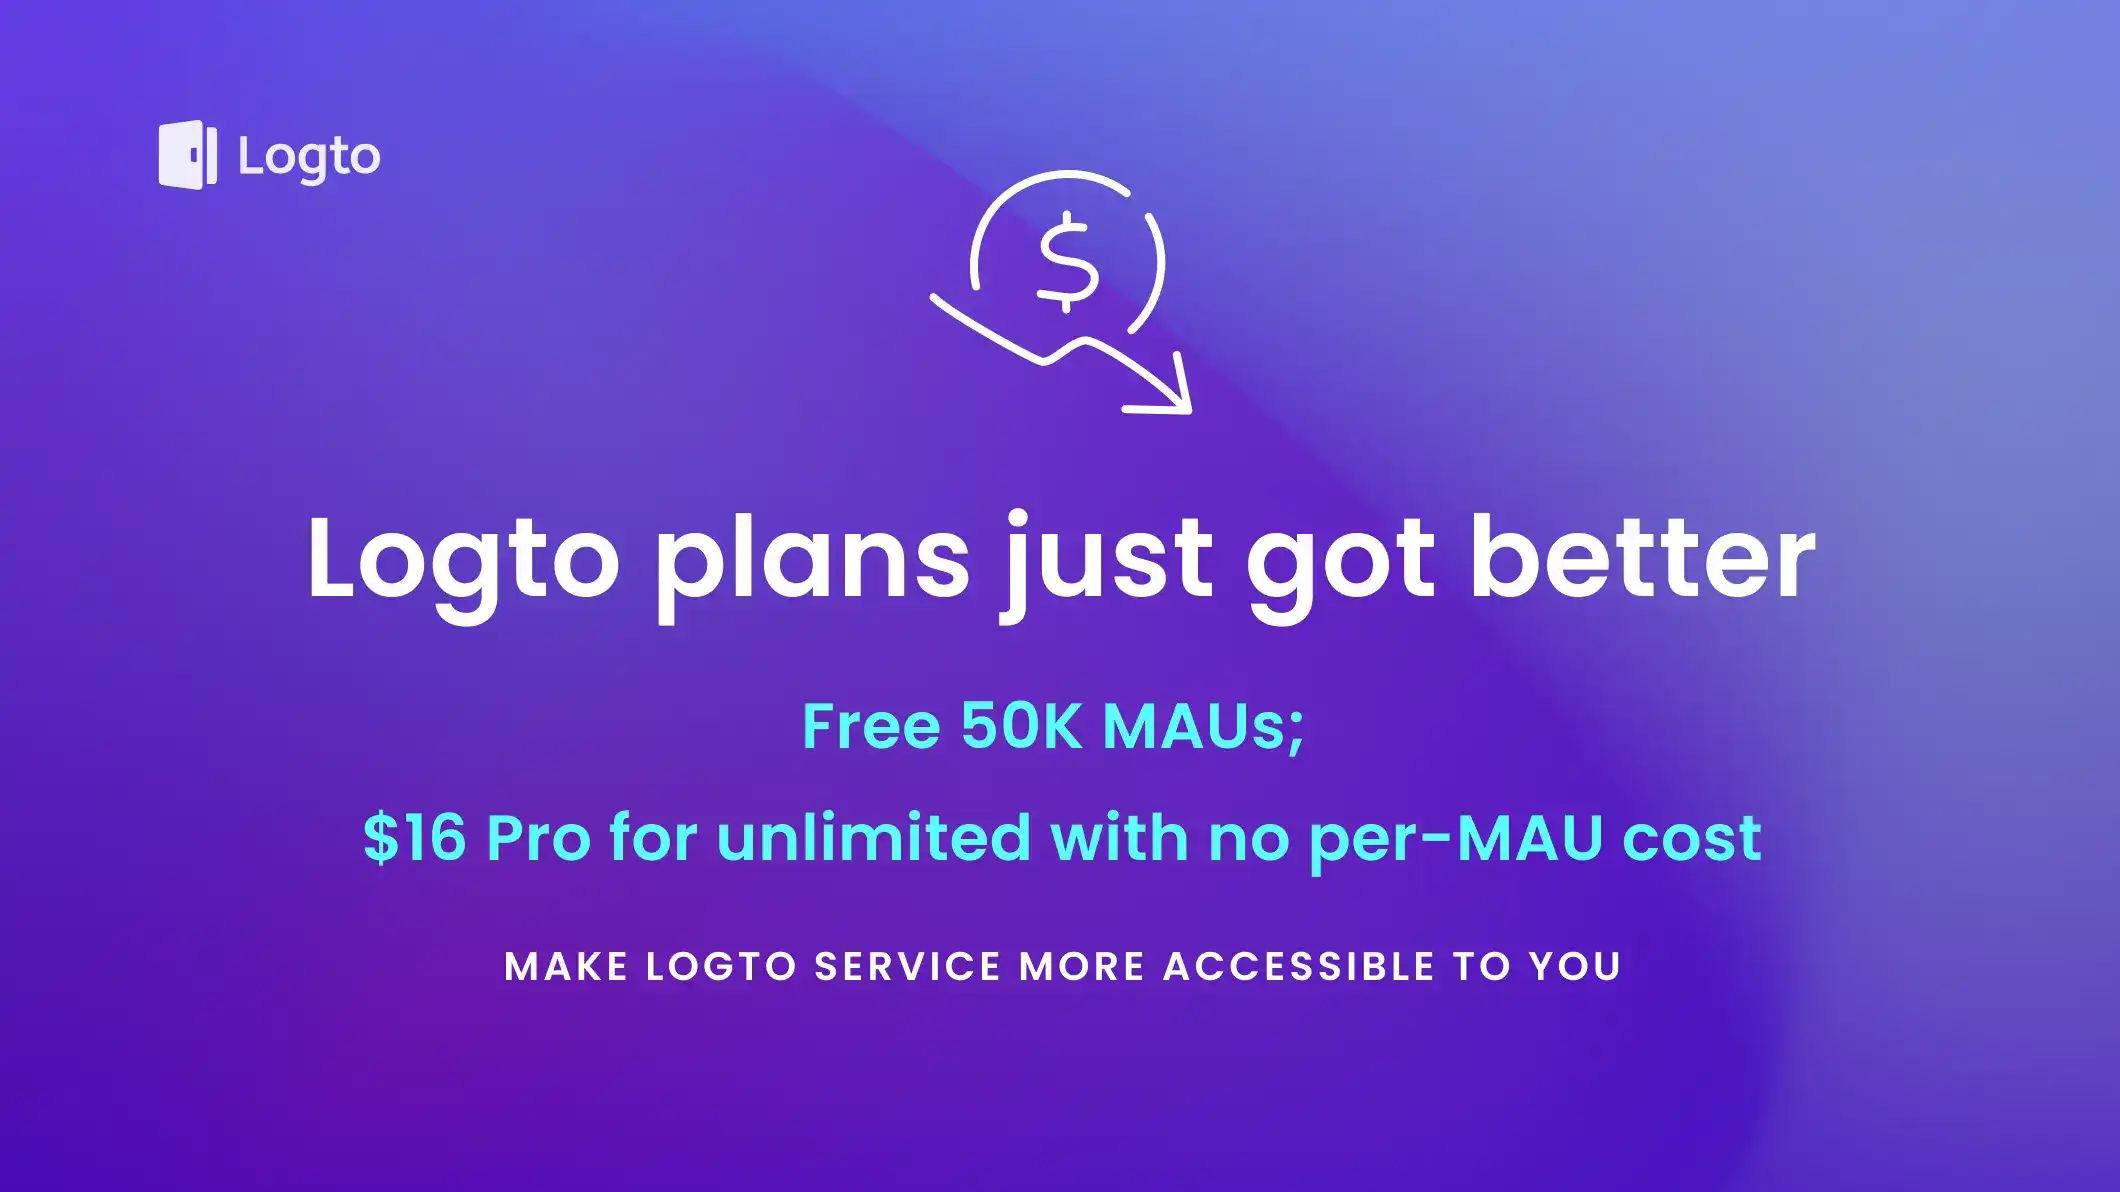 Logto's new plans: Free 50K MAUs; $16 Pro for unlimited with no per-MAU cost